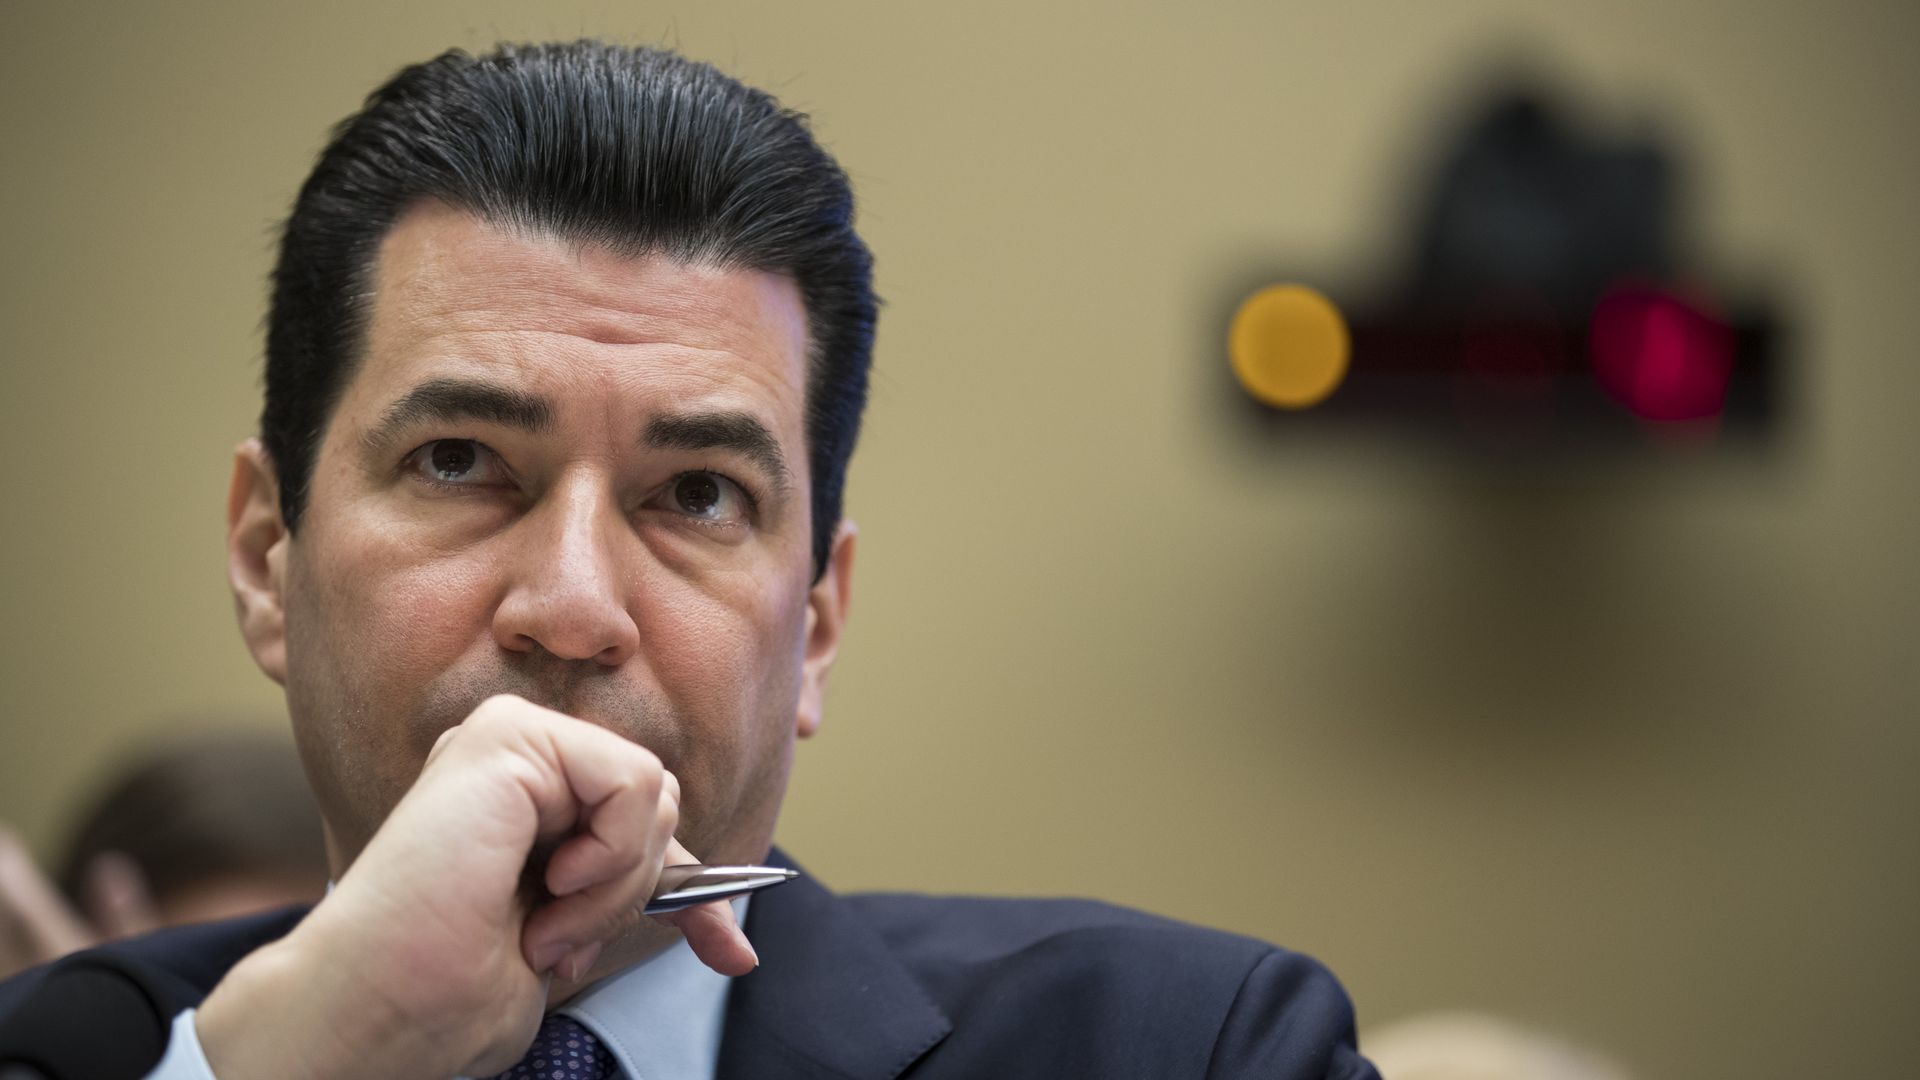 In this image, FDA commissioner Scott Gottlieb sits with a hand covering his mouth as he frowns into the distance beyond the camera. 